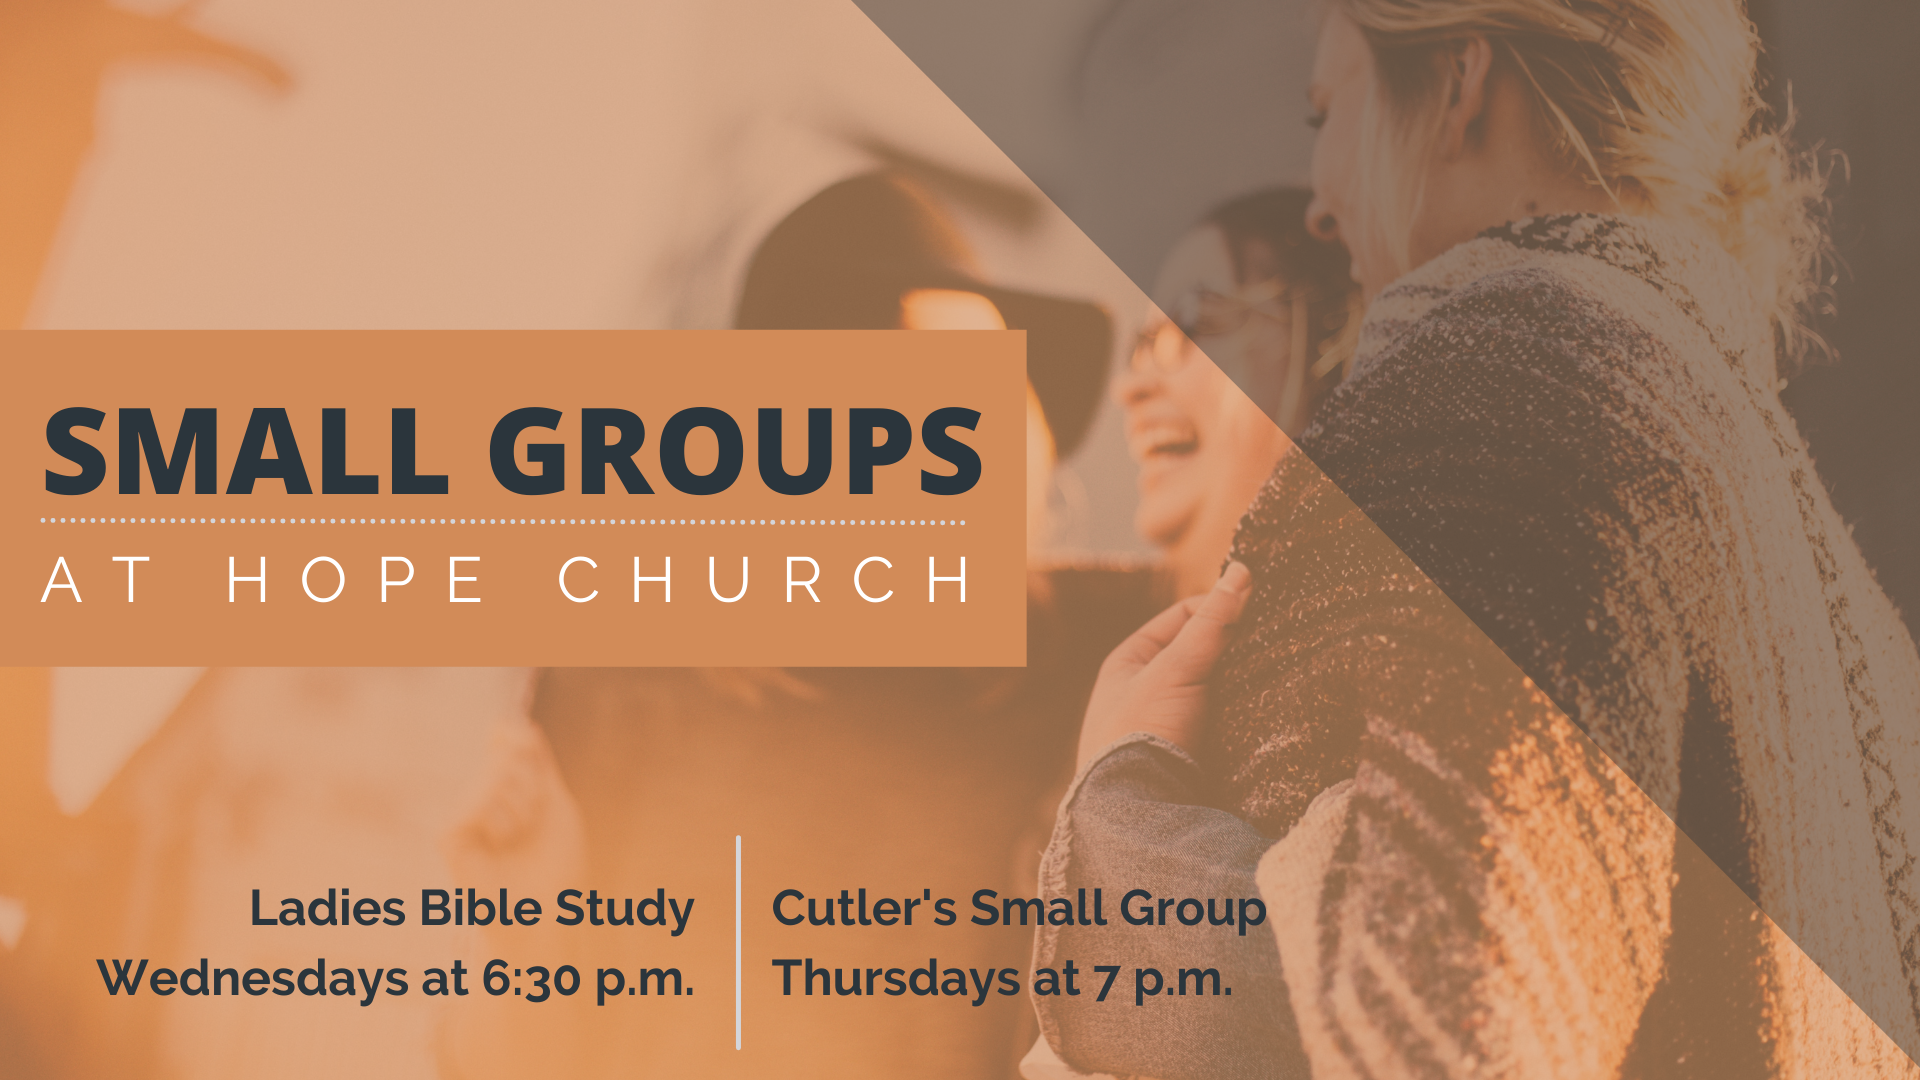 Small Groups at Hope Church in Ballston Spa, New York